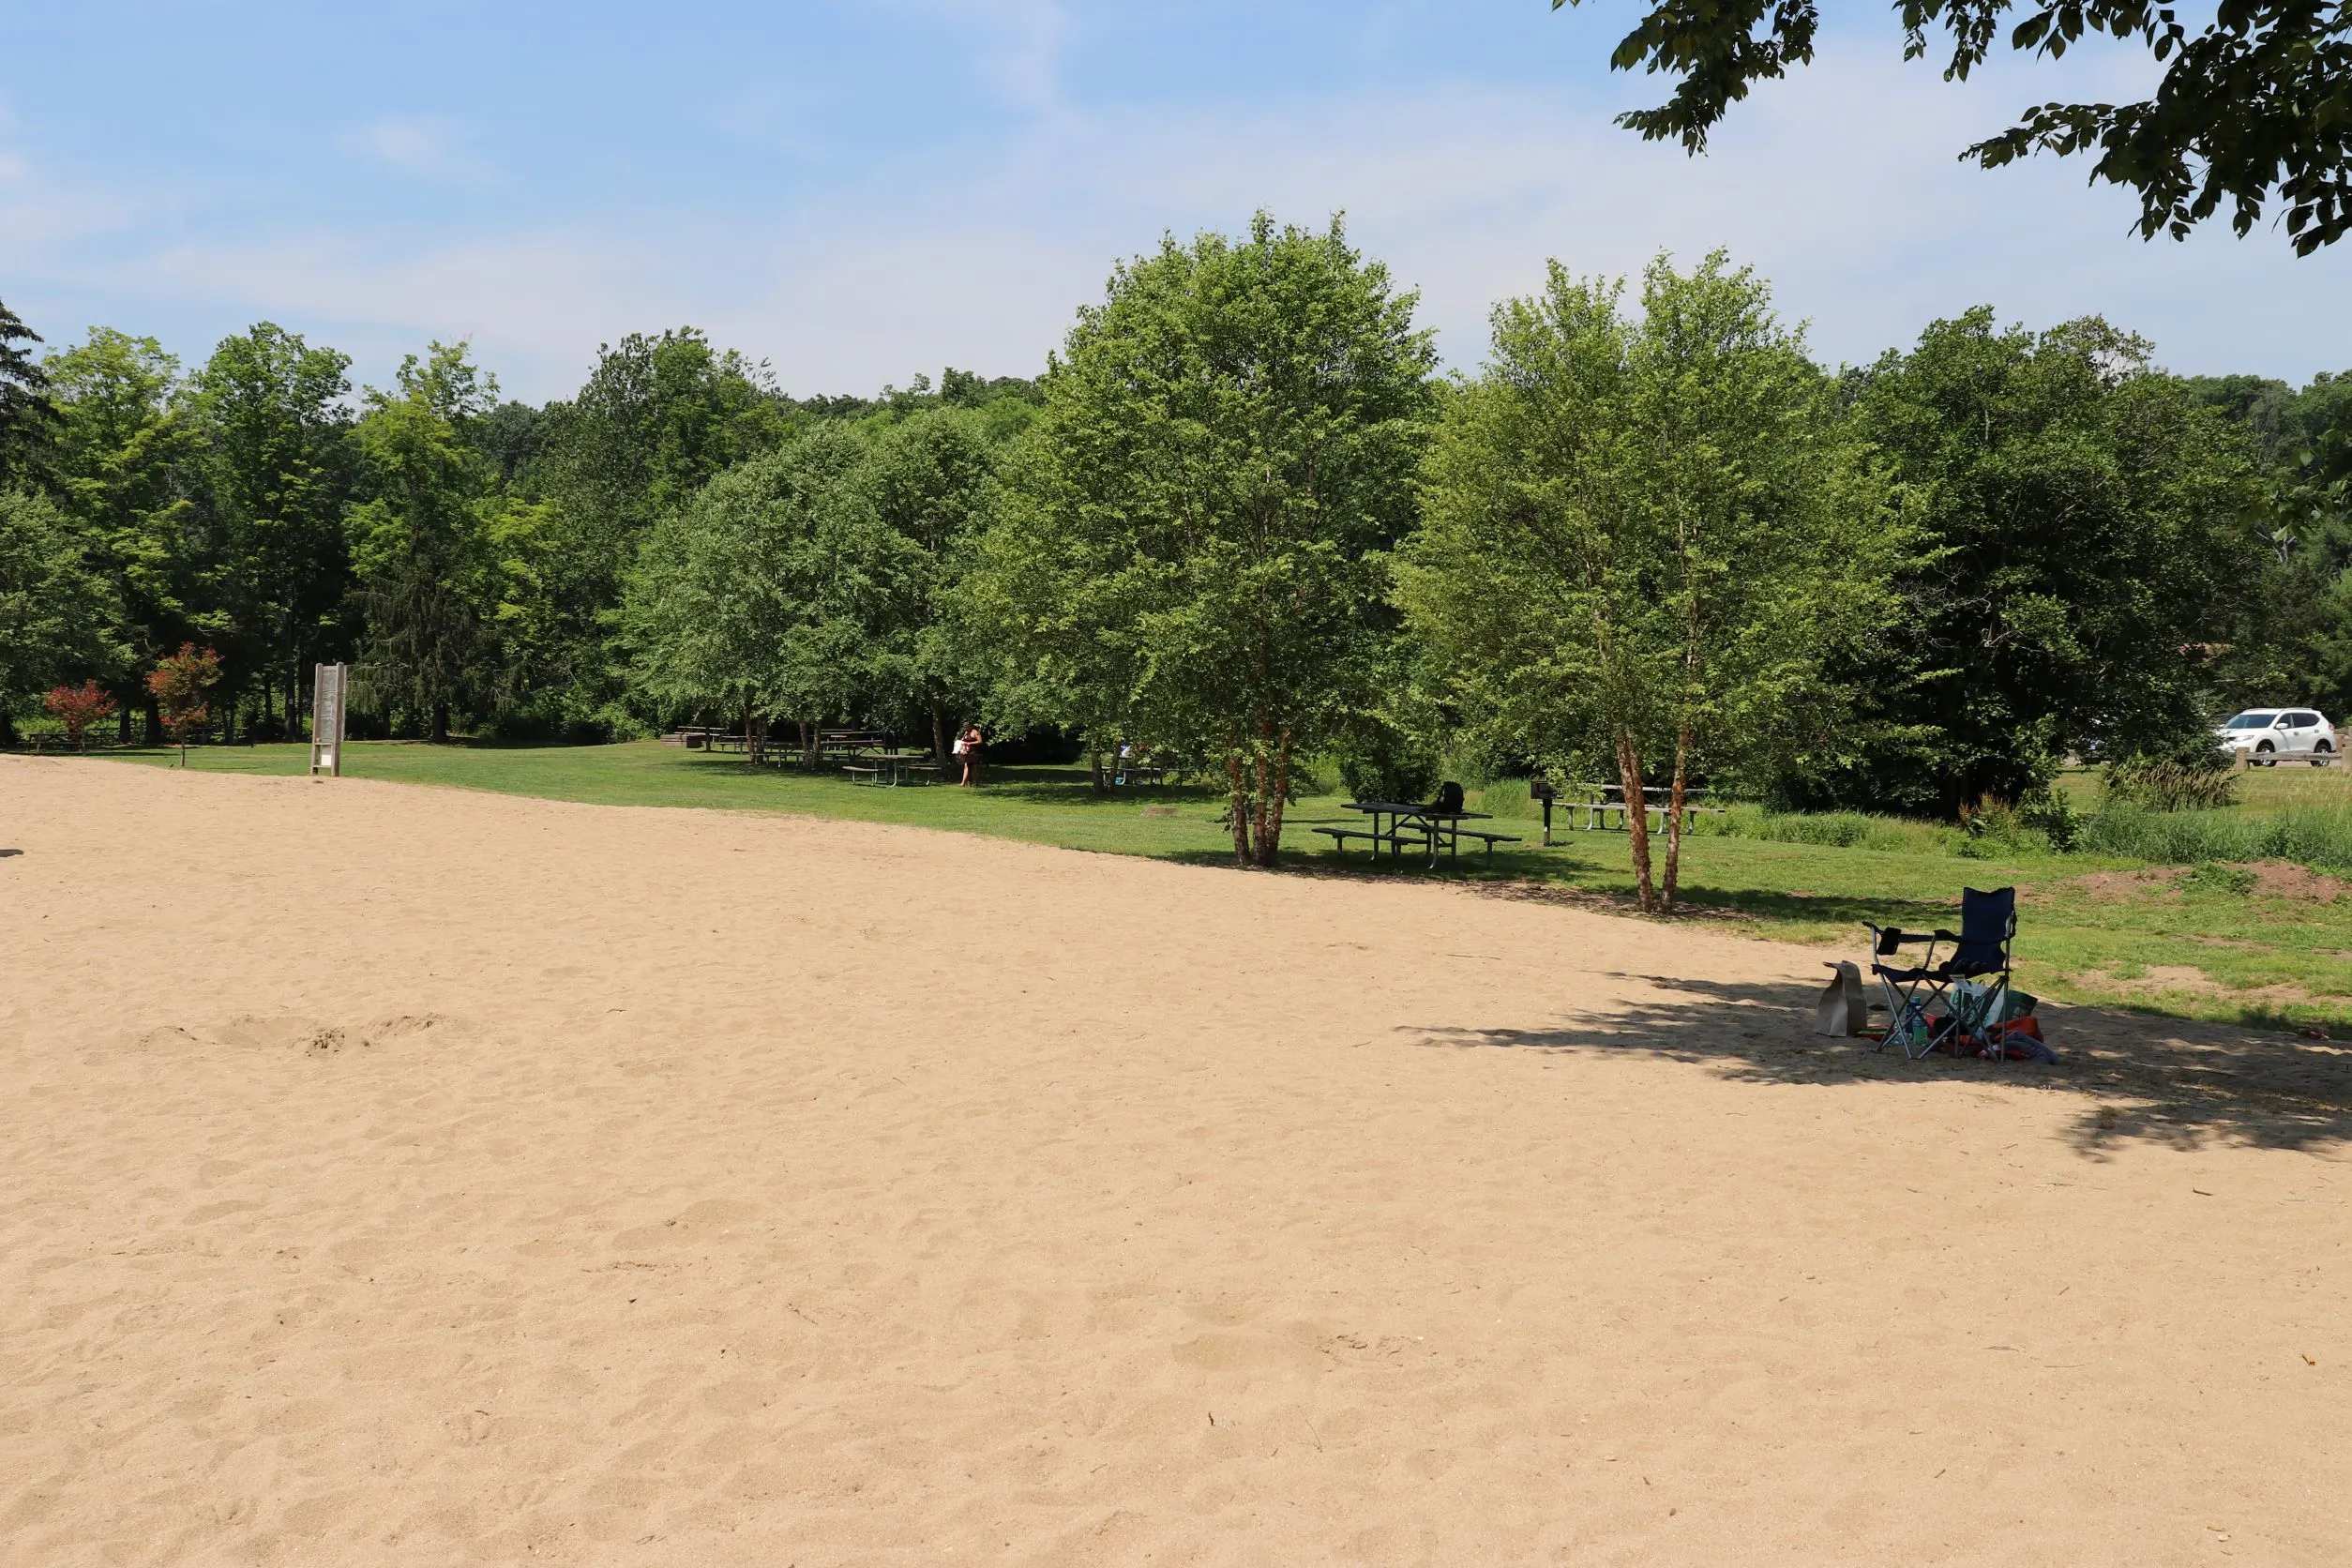 image of sand and picnic tables at swimming beach in wadsworth state park in middletown ct.